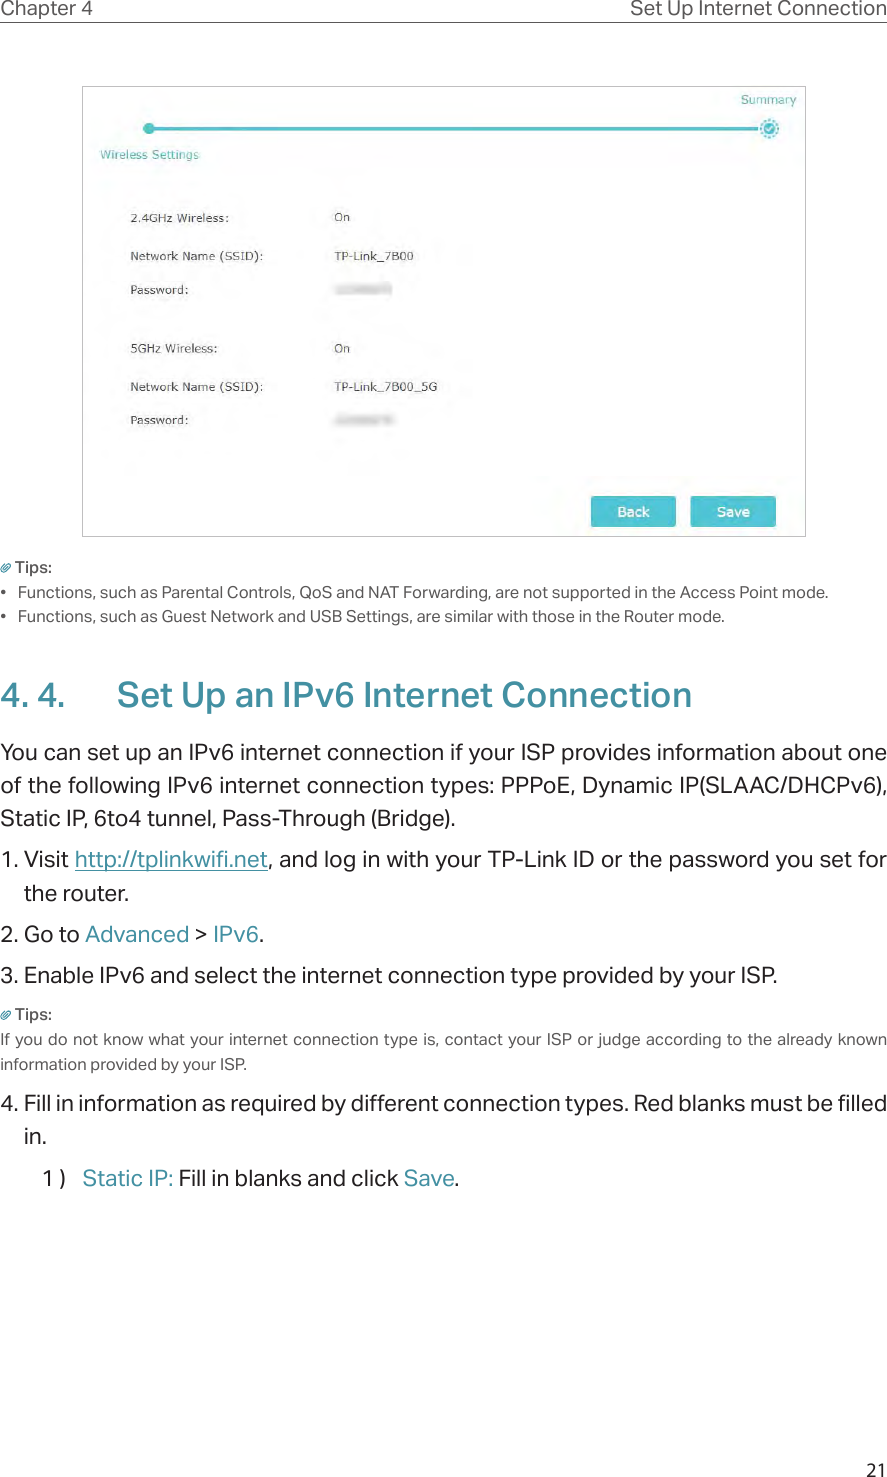 21Chapter 4 Set Up Internet ConnectionTips: •  Functions, such as Parental Controls, QoS and NAT Forwarding, are not supported in the Access Point mode.•  Functions, such as Guest Network and USB Settings, are similar with those in the Router mode.4. 4.  Set Up an IPv6 Internet ConnectionYou can set up an IPv6 internet connection if your ISP provides information about one of the following IPv6 internet connection types: PPPoE, Dynamic IP(SLAAC/DHCPv6), Static IP, 6to4 tunnel, Pass-Through (Bridge).1. Visit http://tplinkwifi.net, and log in with your TP-Link ID or the password you set for the router.2. Go to Advanced &gt; IPv6. 3. Enable IPv6 and select the internet connection type provided by your ISP.Tips:If you do not know what your internet connection type is, contact your ISP or judge according to the already known information provided by your ISP.4. Fill in information as required by different connection types. Red blanks must be filled in.1 )  Static IP: Fill in blanks and click Save.